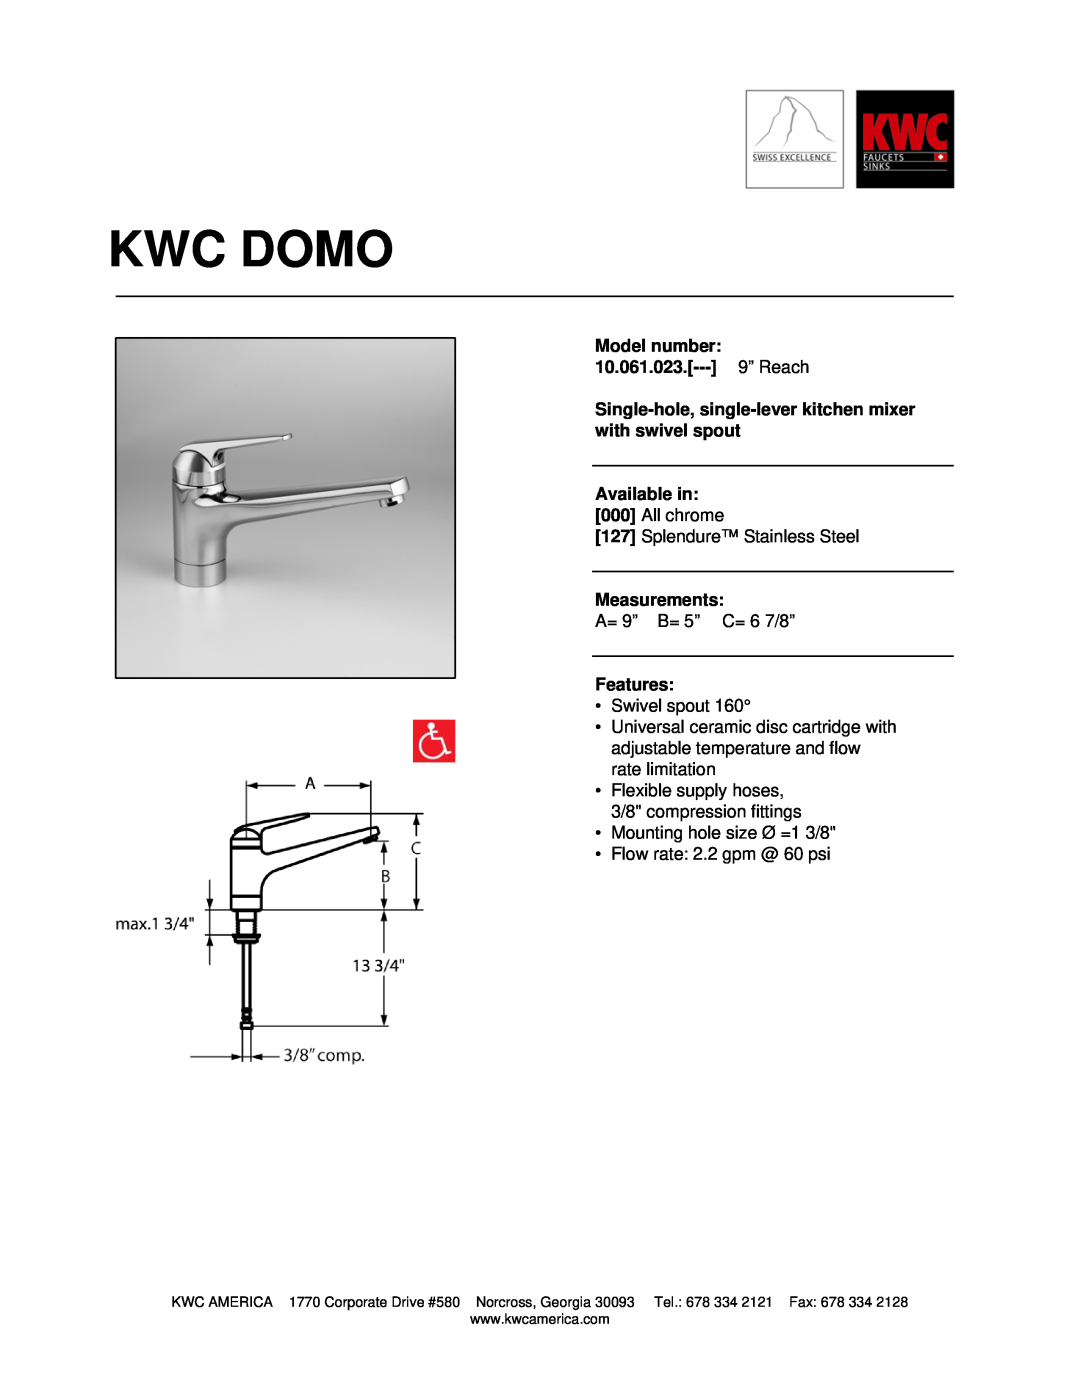 KWC manual Kwc Domo, Model number 10.061.023.--- 9” Reach, Available in, Measurements, Features 